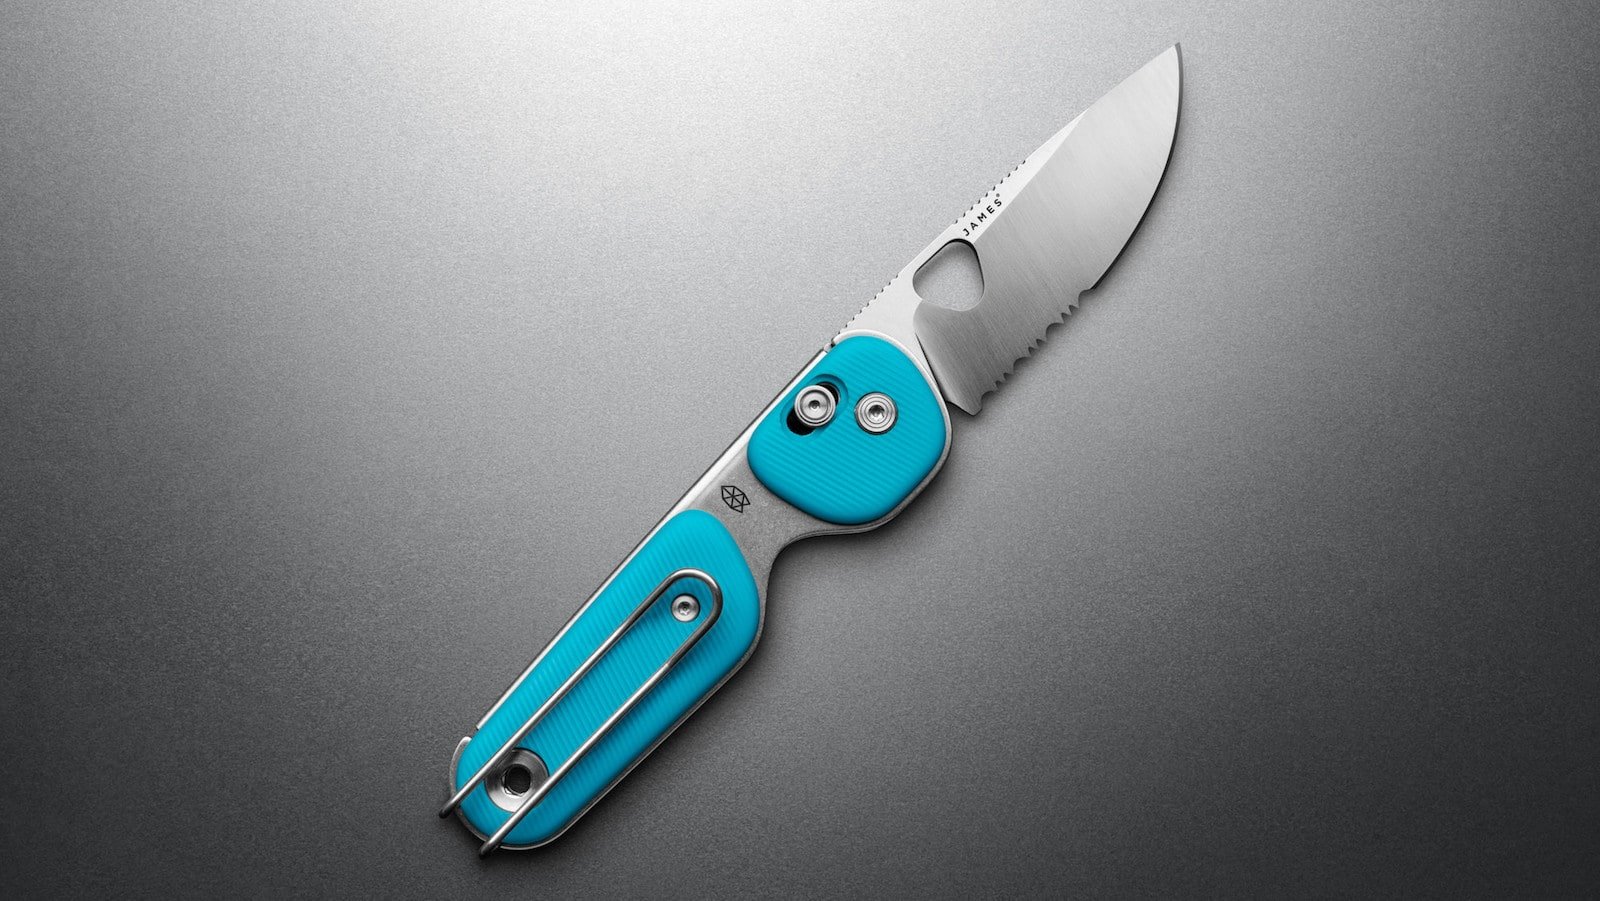 The James Brand The Redstone outdoor adventure knife features a 2.5-inch, steel blade